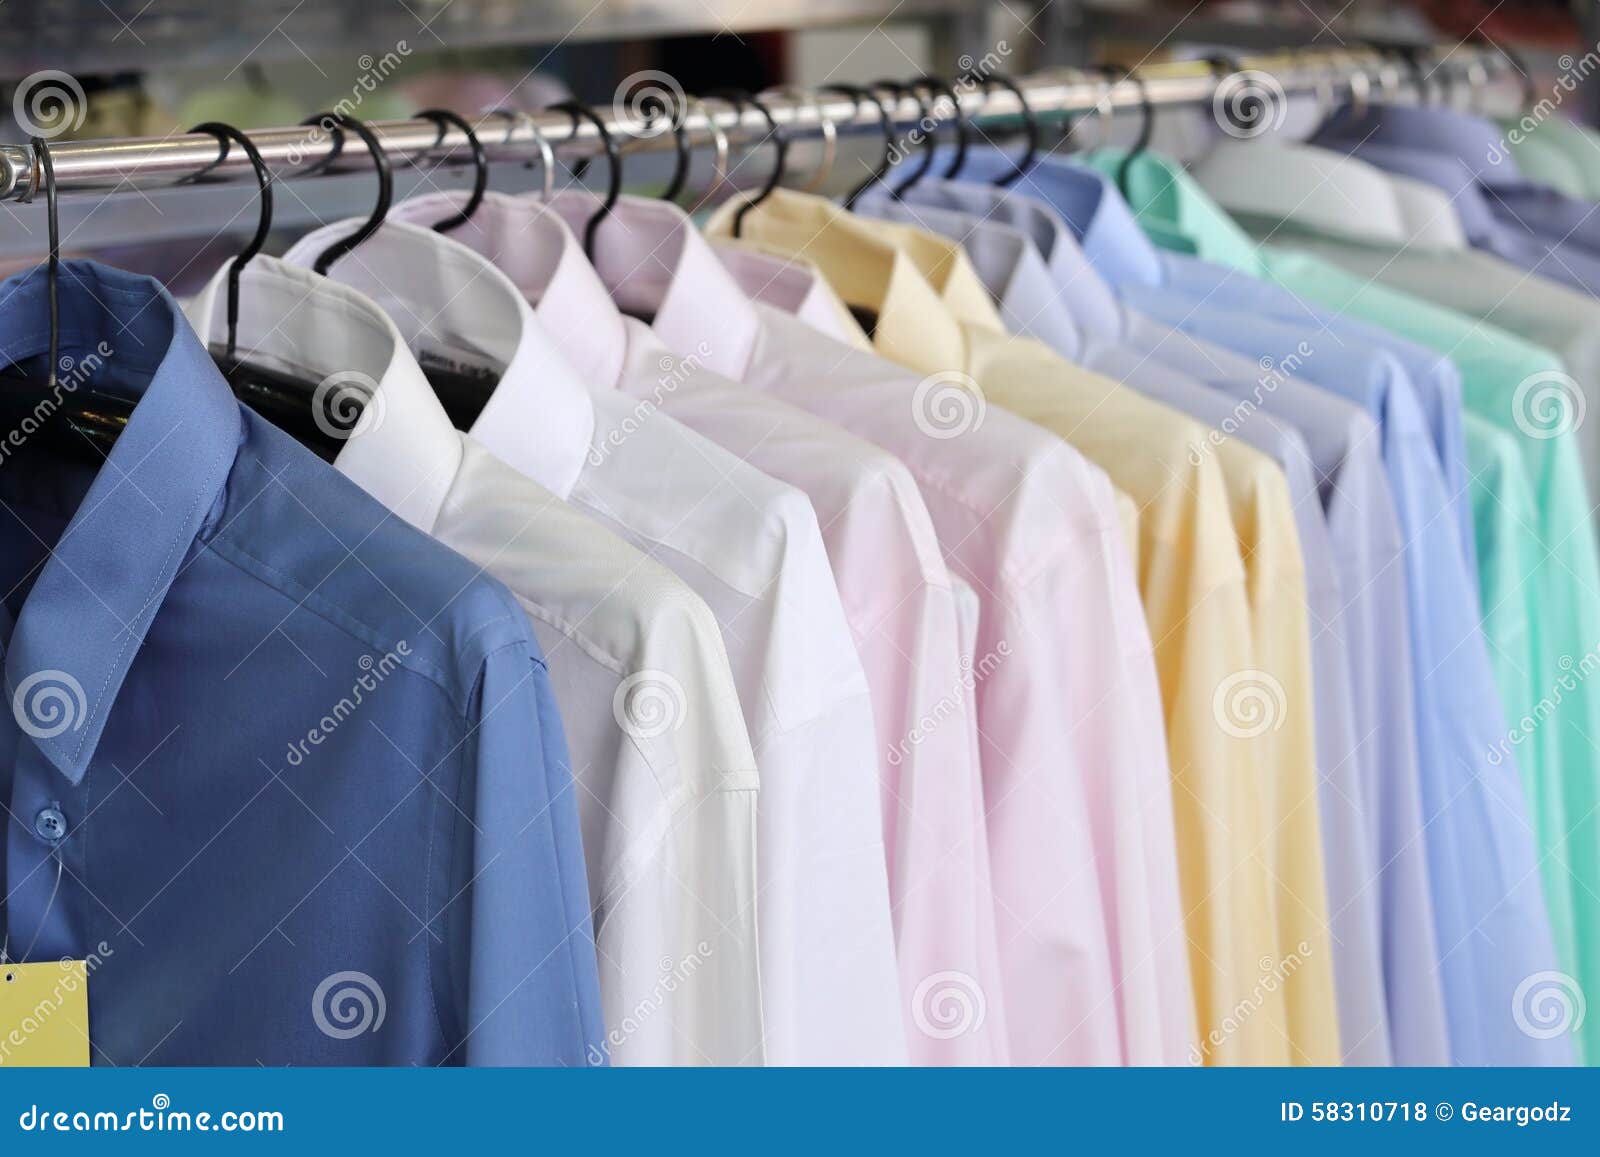 617 Formal Clothes Hangers Stock Photos - Free & Royalty-Free